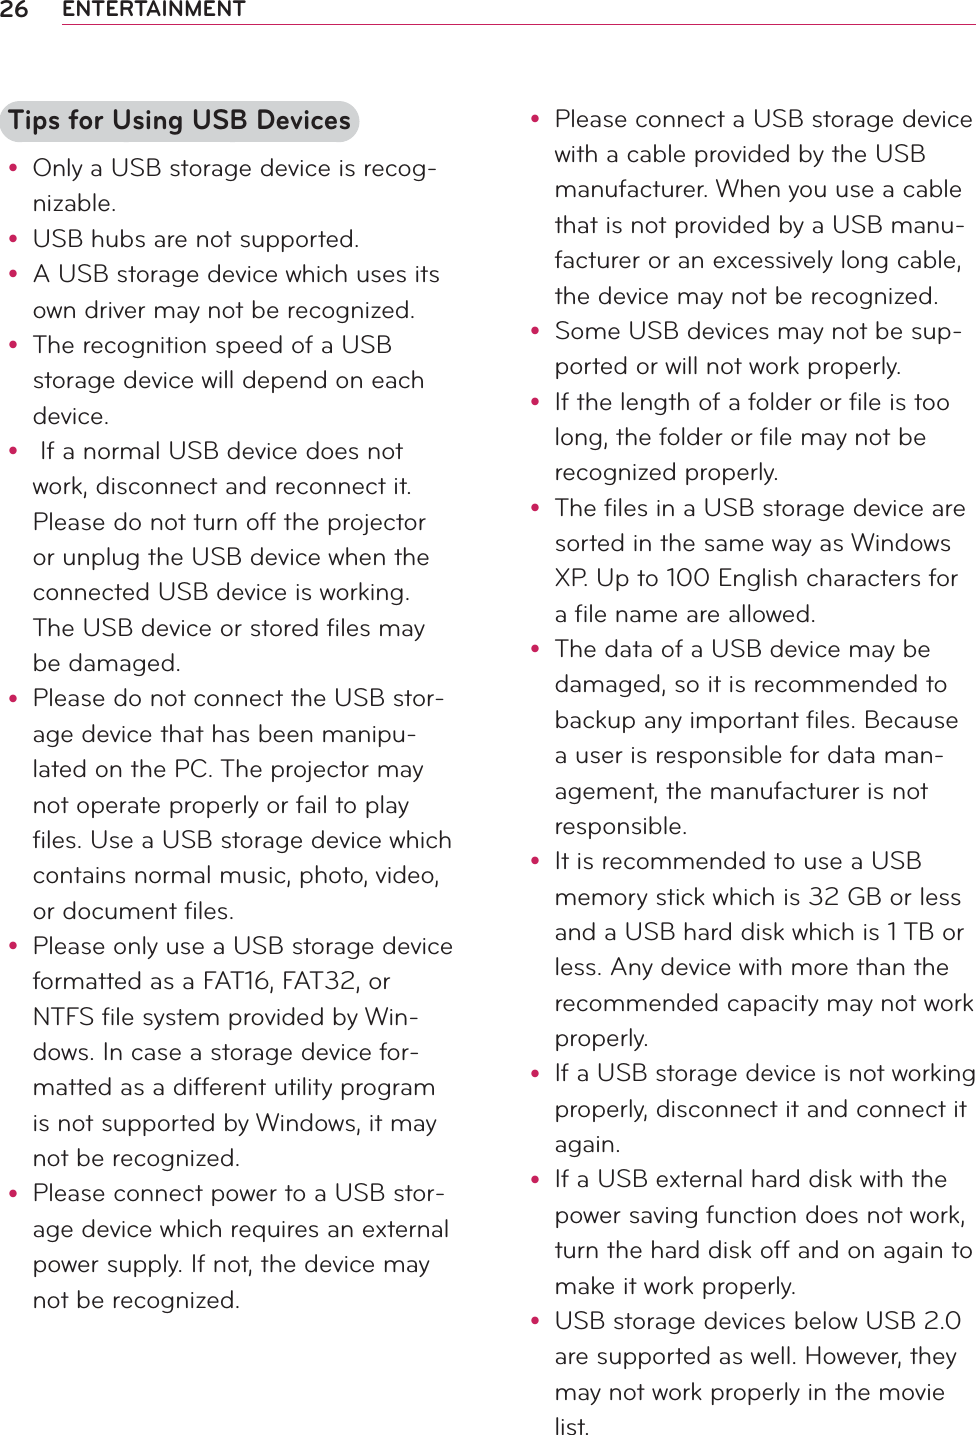 26 ENTERTAINMENTTips for Using USB Devicesy Only a USB storage device is recog-nizable.y USB hubs are not supported.y A USB storage device which uses its own driver may not be recognized.y The recognition speed of a USB storage device will depend on each device.y  If a normal USB device does not work, disconnect and reconnect it. Please do not turn off the projector or unplug the USB device when the connected USB device is working. The USB device or stored files may be damaged.y Please do not connect the USB stor-age device that has been manipu-lated on the PC. The projector may not operate properly or fail to play files. Use a USB storage device which contains normal music, photo, video, or document files.y Please only use a USB storage device formatted as a FAT16, FAT32, or NTFS file system provided by Win-dows. In case a storage device for-matted as a different utility program is not supported by Windows, it may not be recognized.y Please connect power to a USB stor-age device which requires an external power supply. If not, the device may not be recognized.y Please connect a USB storage device with a cable provided by the USB manufacturer. When you use a cable that is not provided by a USB manu-facturer or an excessively long cable, the device may not be recognized.y Some USB devices may not be sup-ported or will not work properly.y If the length of a folder or file is too long, the folder or file may not be recognized properly.y The files in a USB storage device are sorted in the same way as Windows XP. Up to 100 English characters for a file name are allowed.y The data of a USB device may be damaged, so it is recommended to backup any important files. Because a user is responsible for data man-agement, the manufacturer is not responsible.y It is recommended to use a USB memory stick which is 32 GB or less and a USB hard disk which is 1 TB or less. Any device with more than the recommended capacity may not work properly.y If a USB storage device is not working properly, disconnect it and connect it again.y If a USB external hard disk with the power saving function does not work, turn the hard disk off and on again to make it work properly.y USB storage devices below USB 2.0 are supported as well. However, they may not work properly in the movie list.